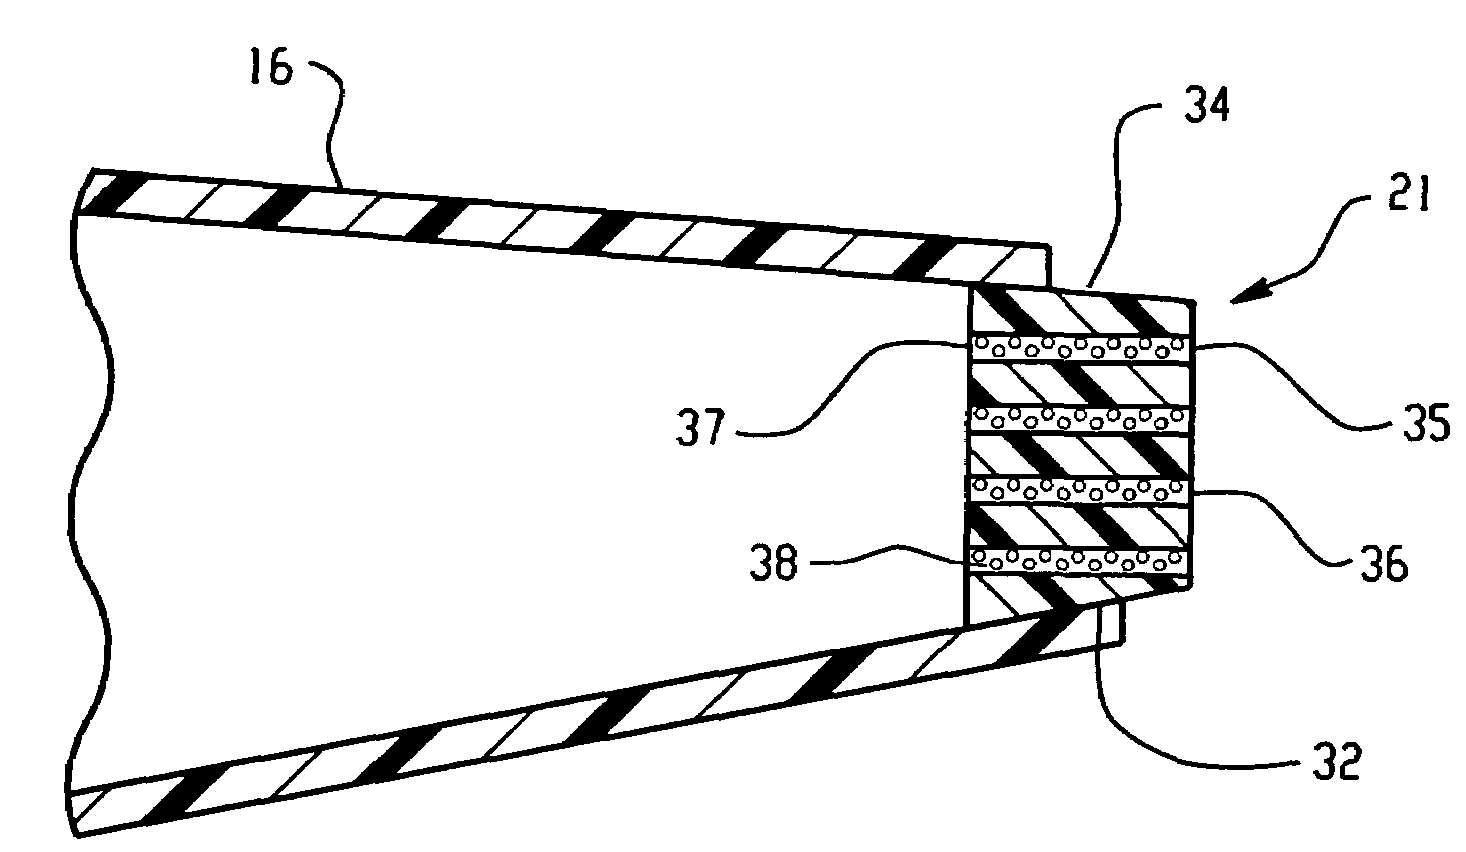 Device for precise chemical delivery and solution preparation